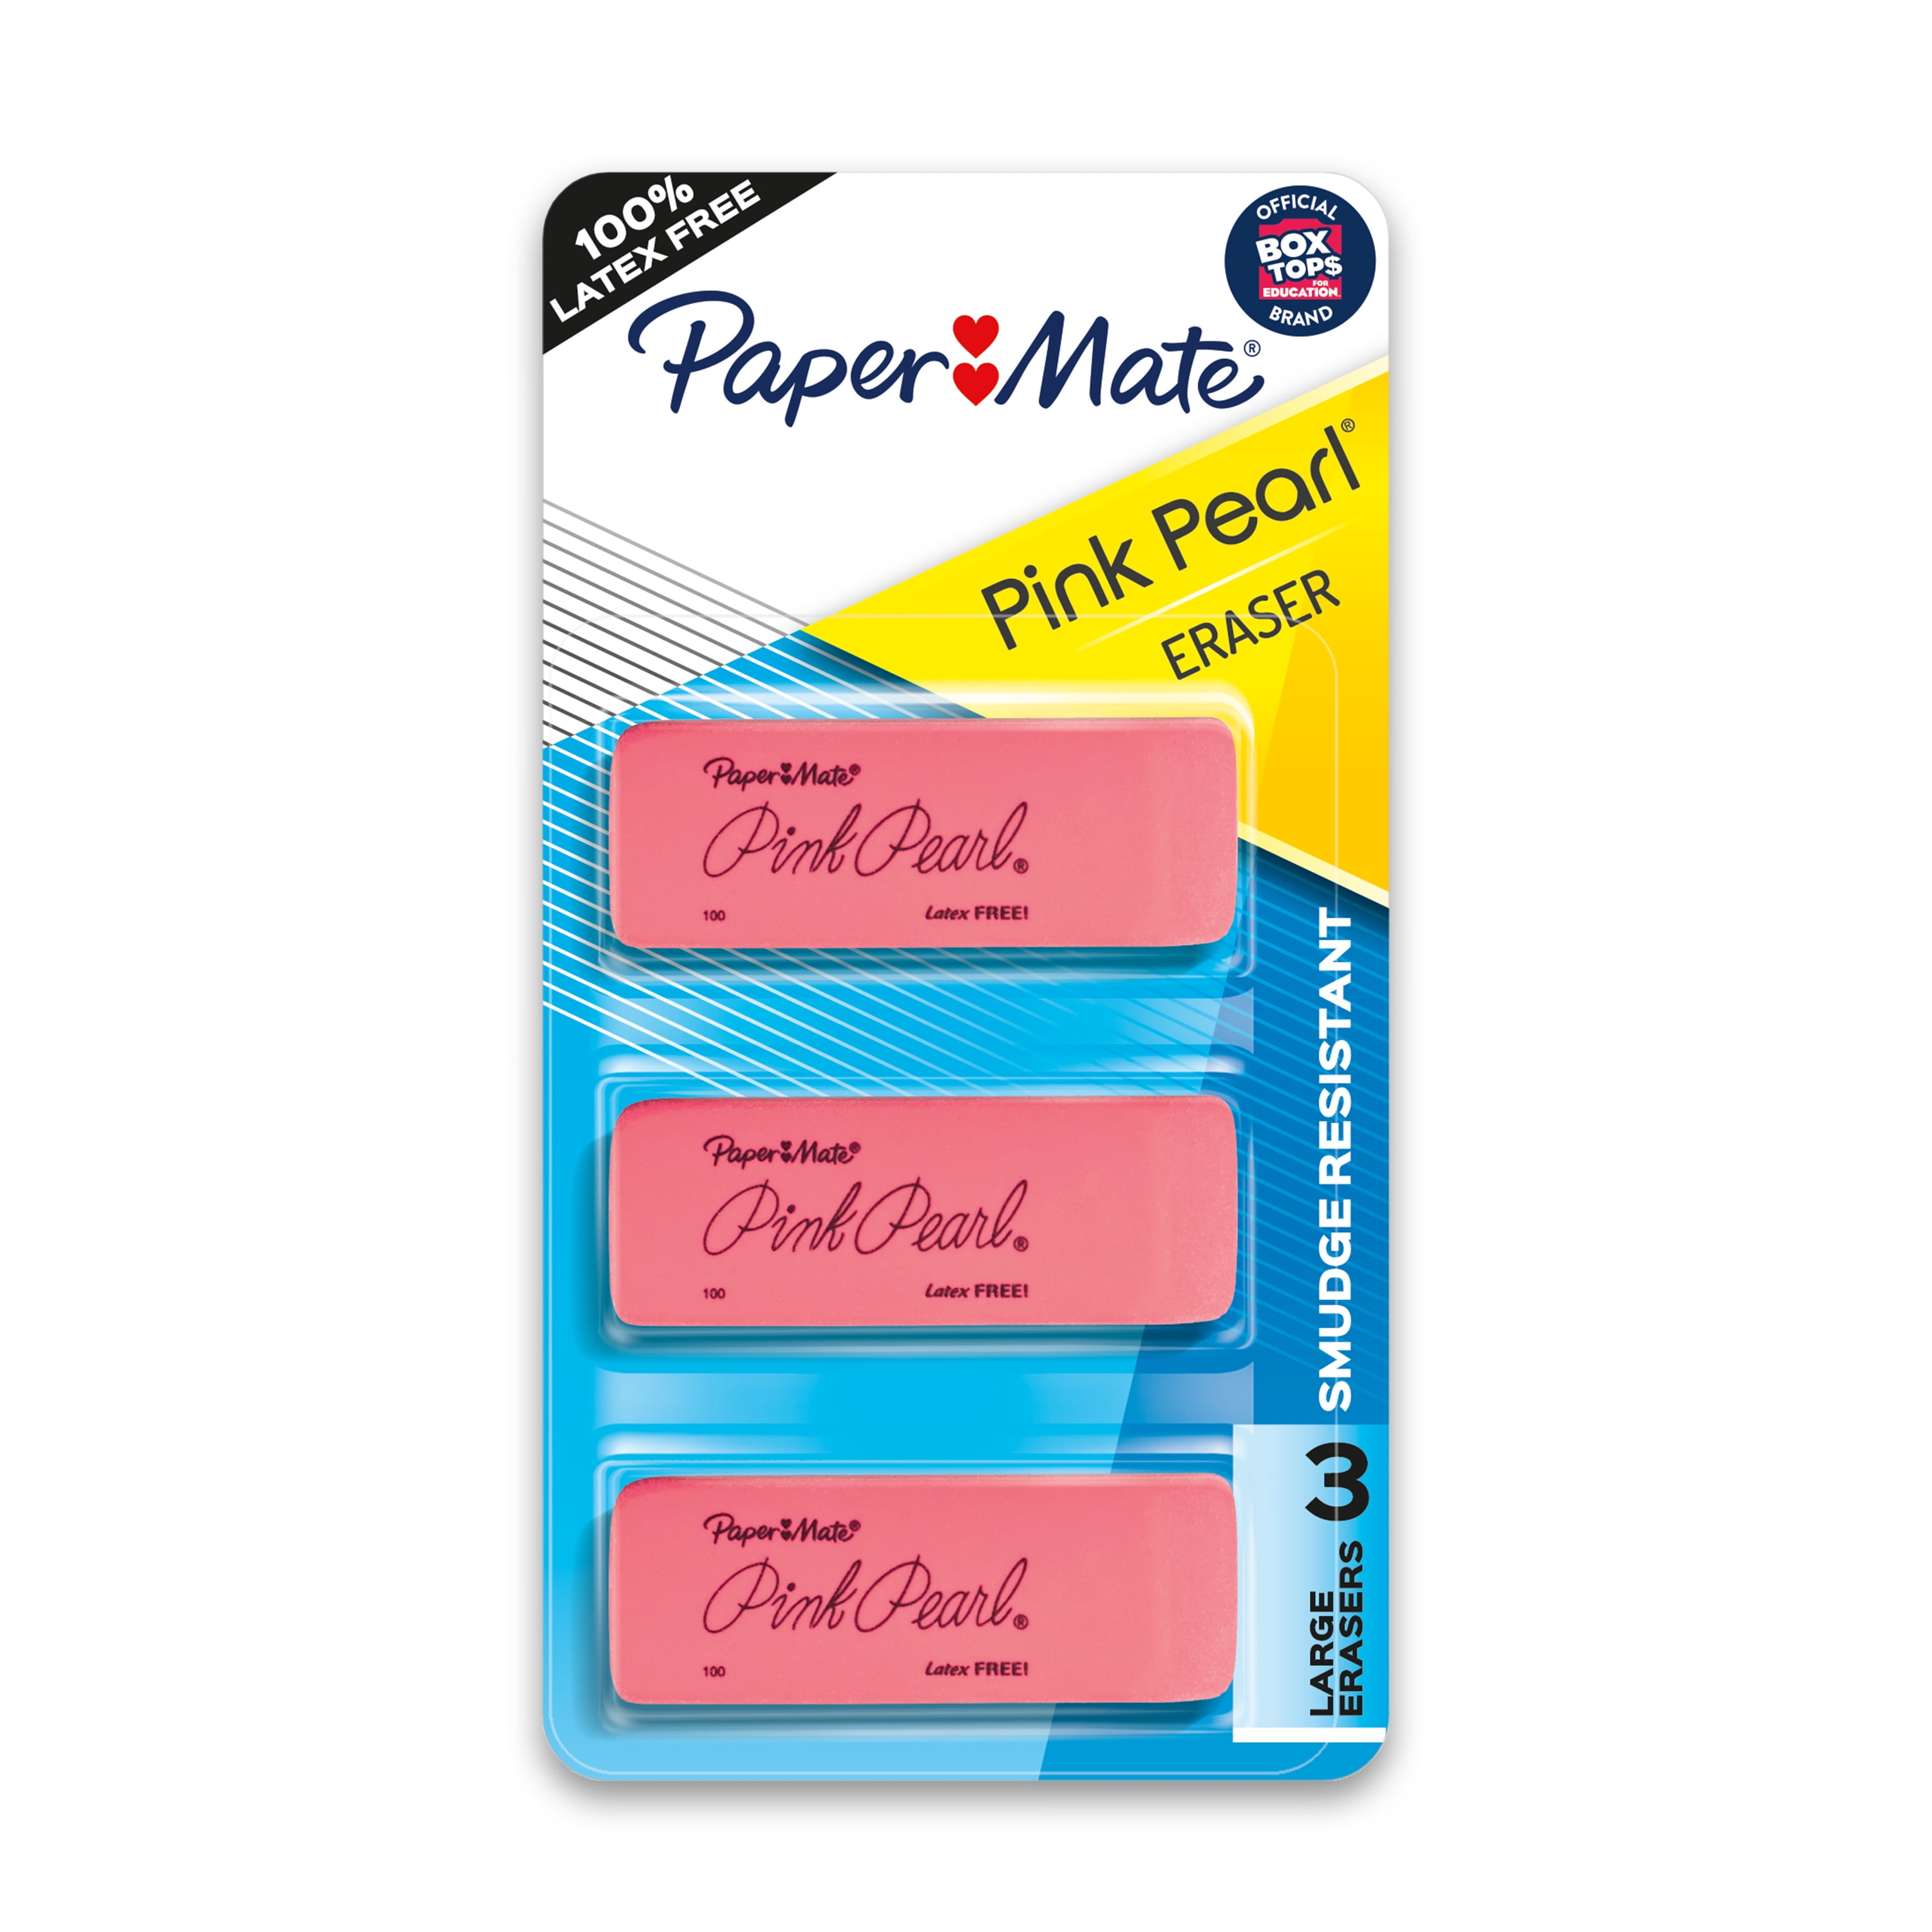 - New 12 Count , Large White Pearl Erasers, 